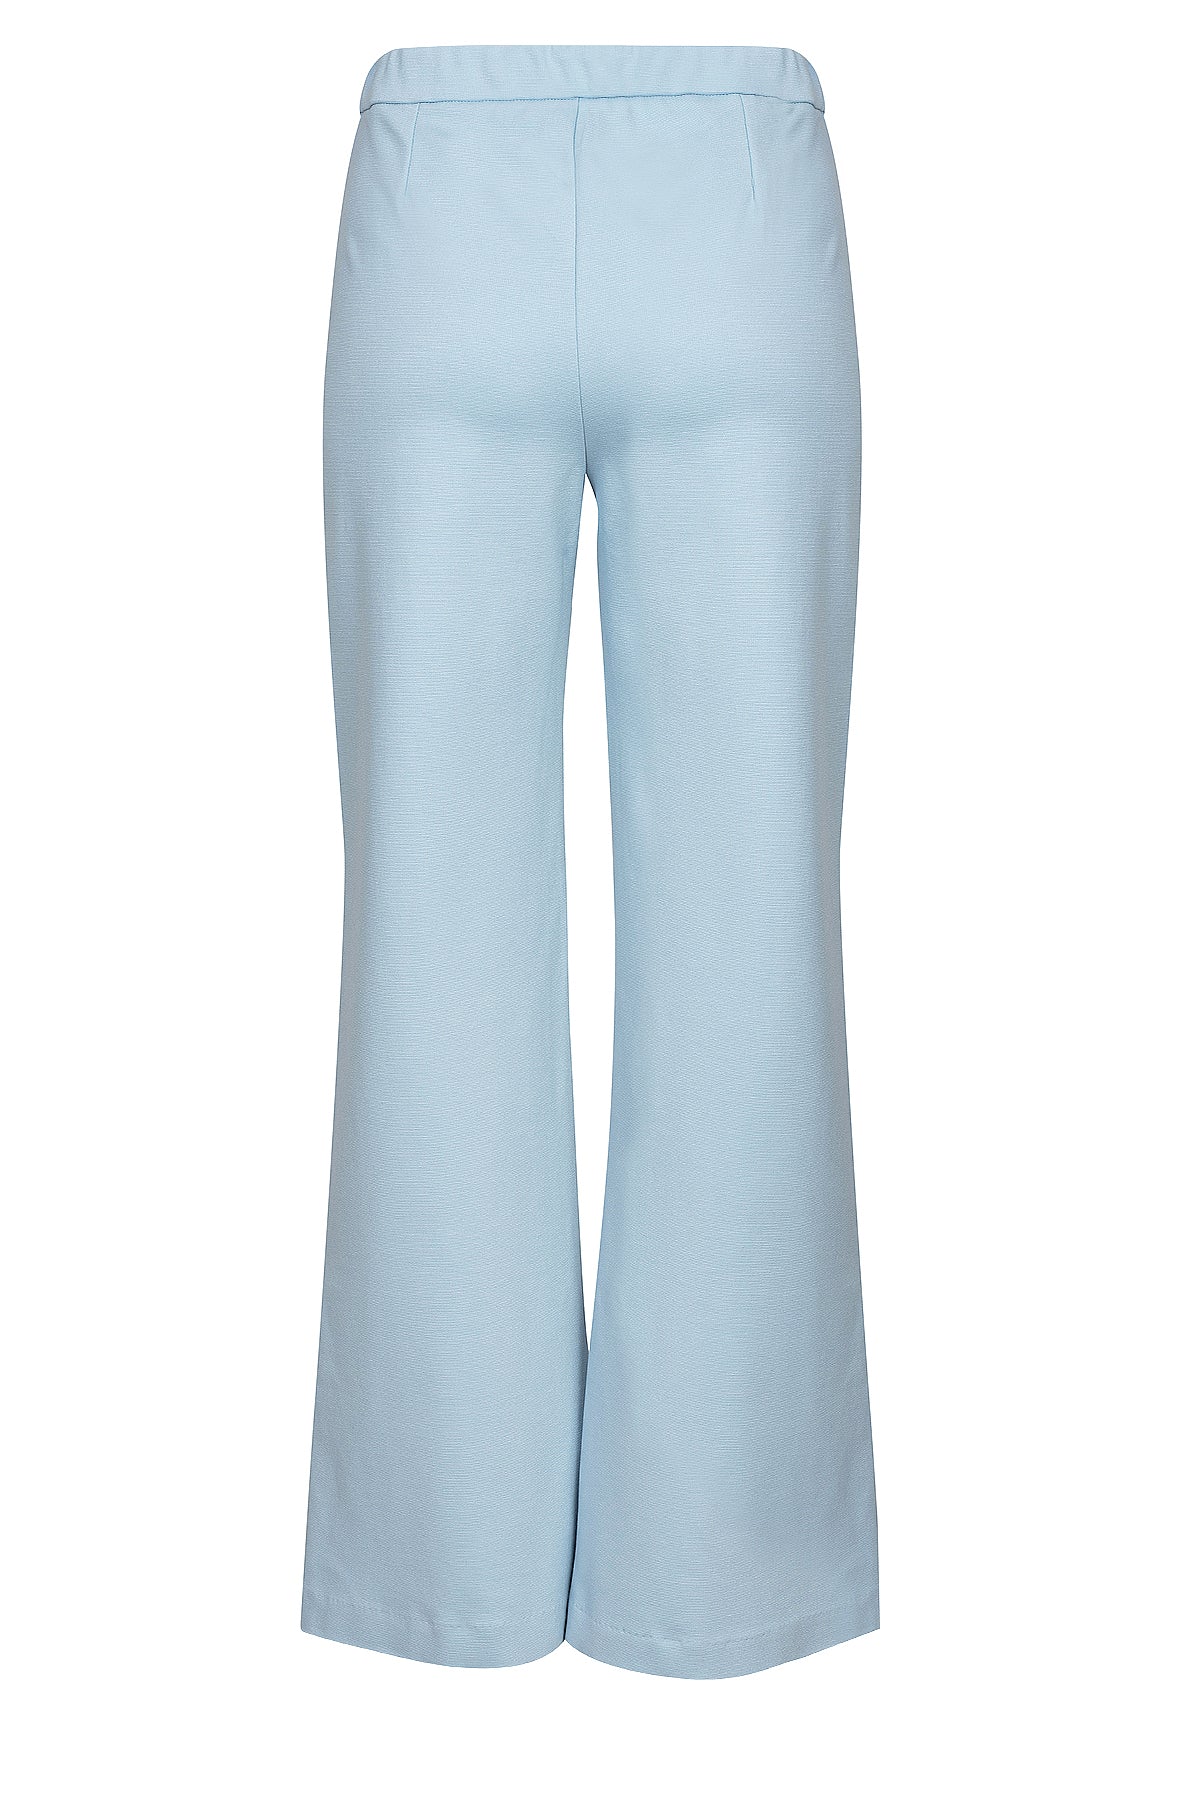 LUXZUZ // ONE TWO Beate Pant Pant 510 Chambray Blue